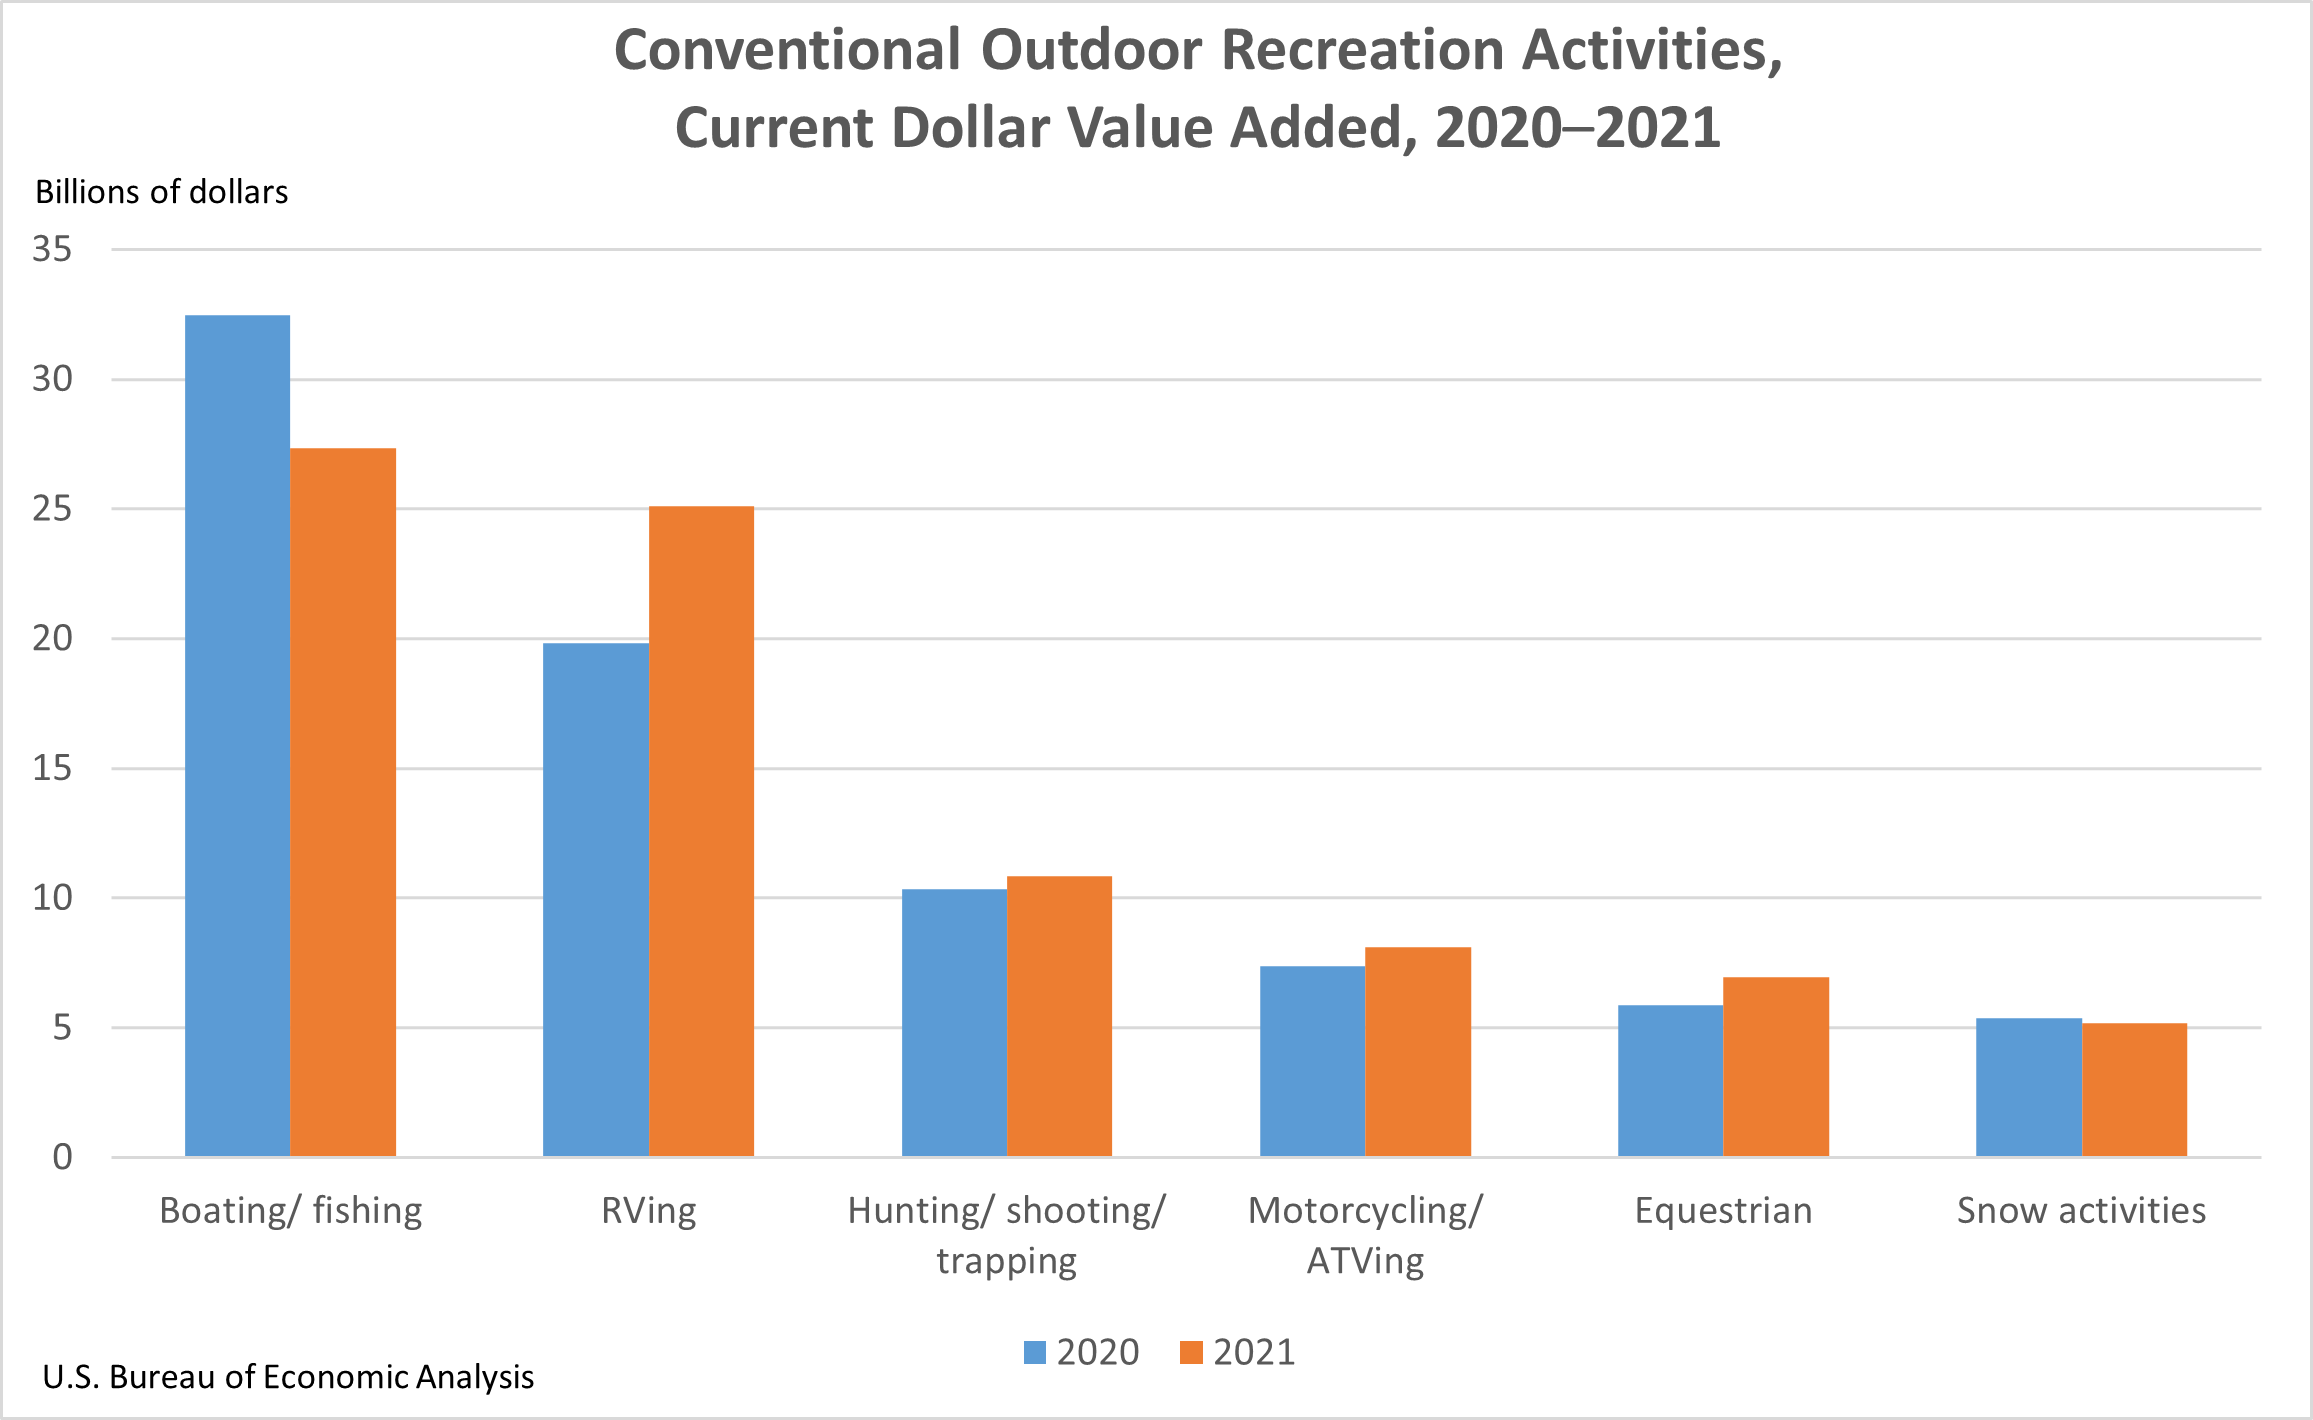 Conventional Outdoor Recreation Categories, Current Dollar Value Added